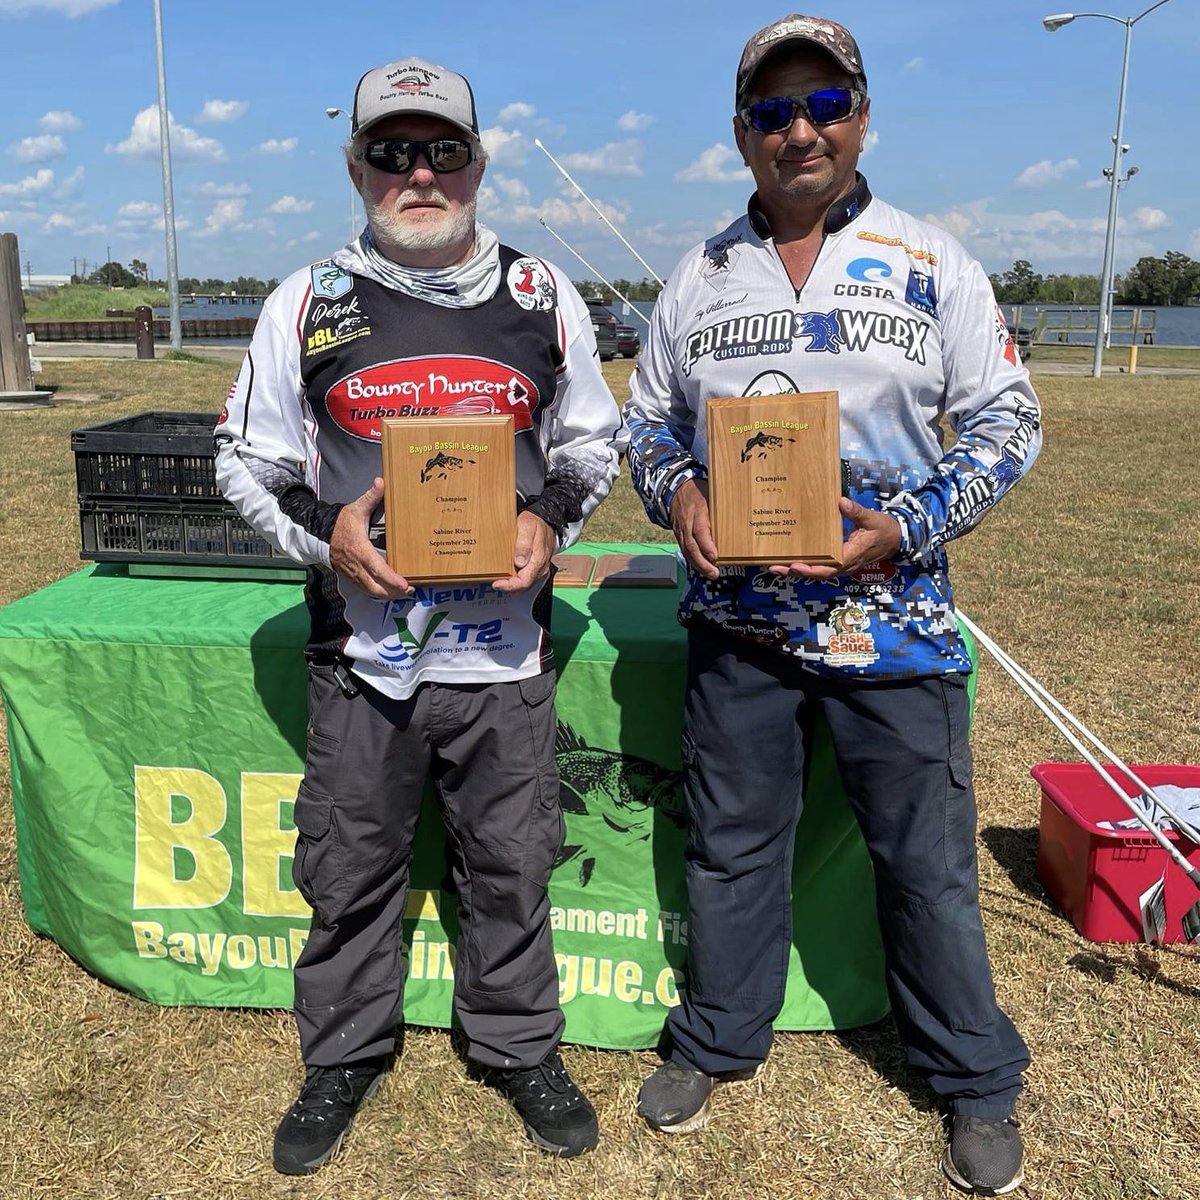 My teammate and I won the BBL Championship!! Next stop is the Bassmaster Team Championship!